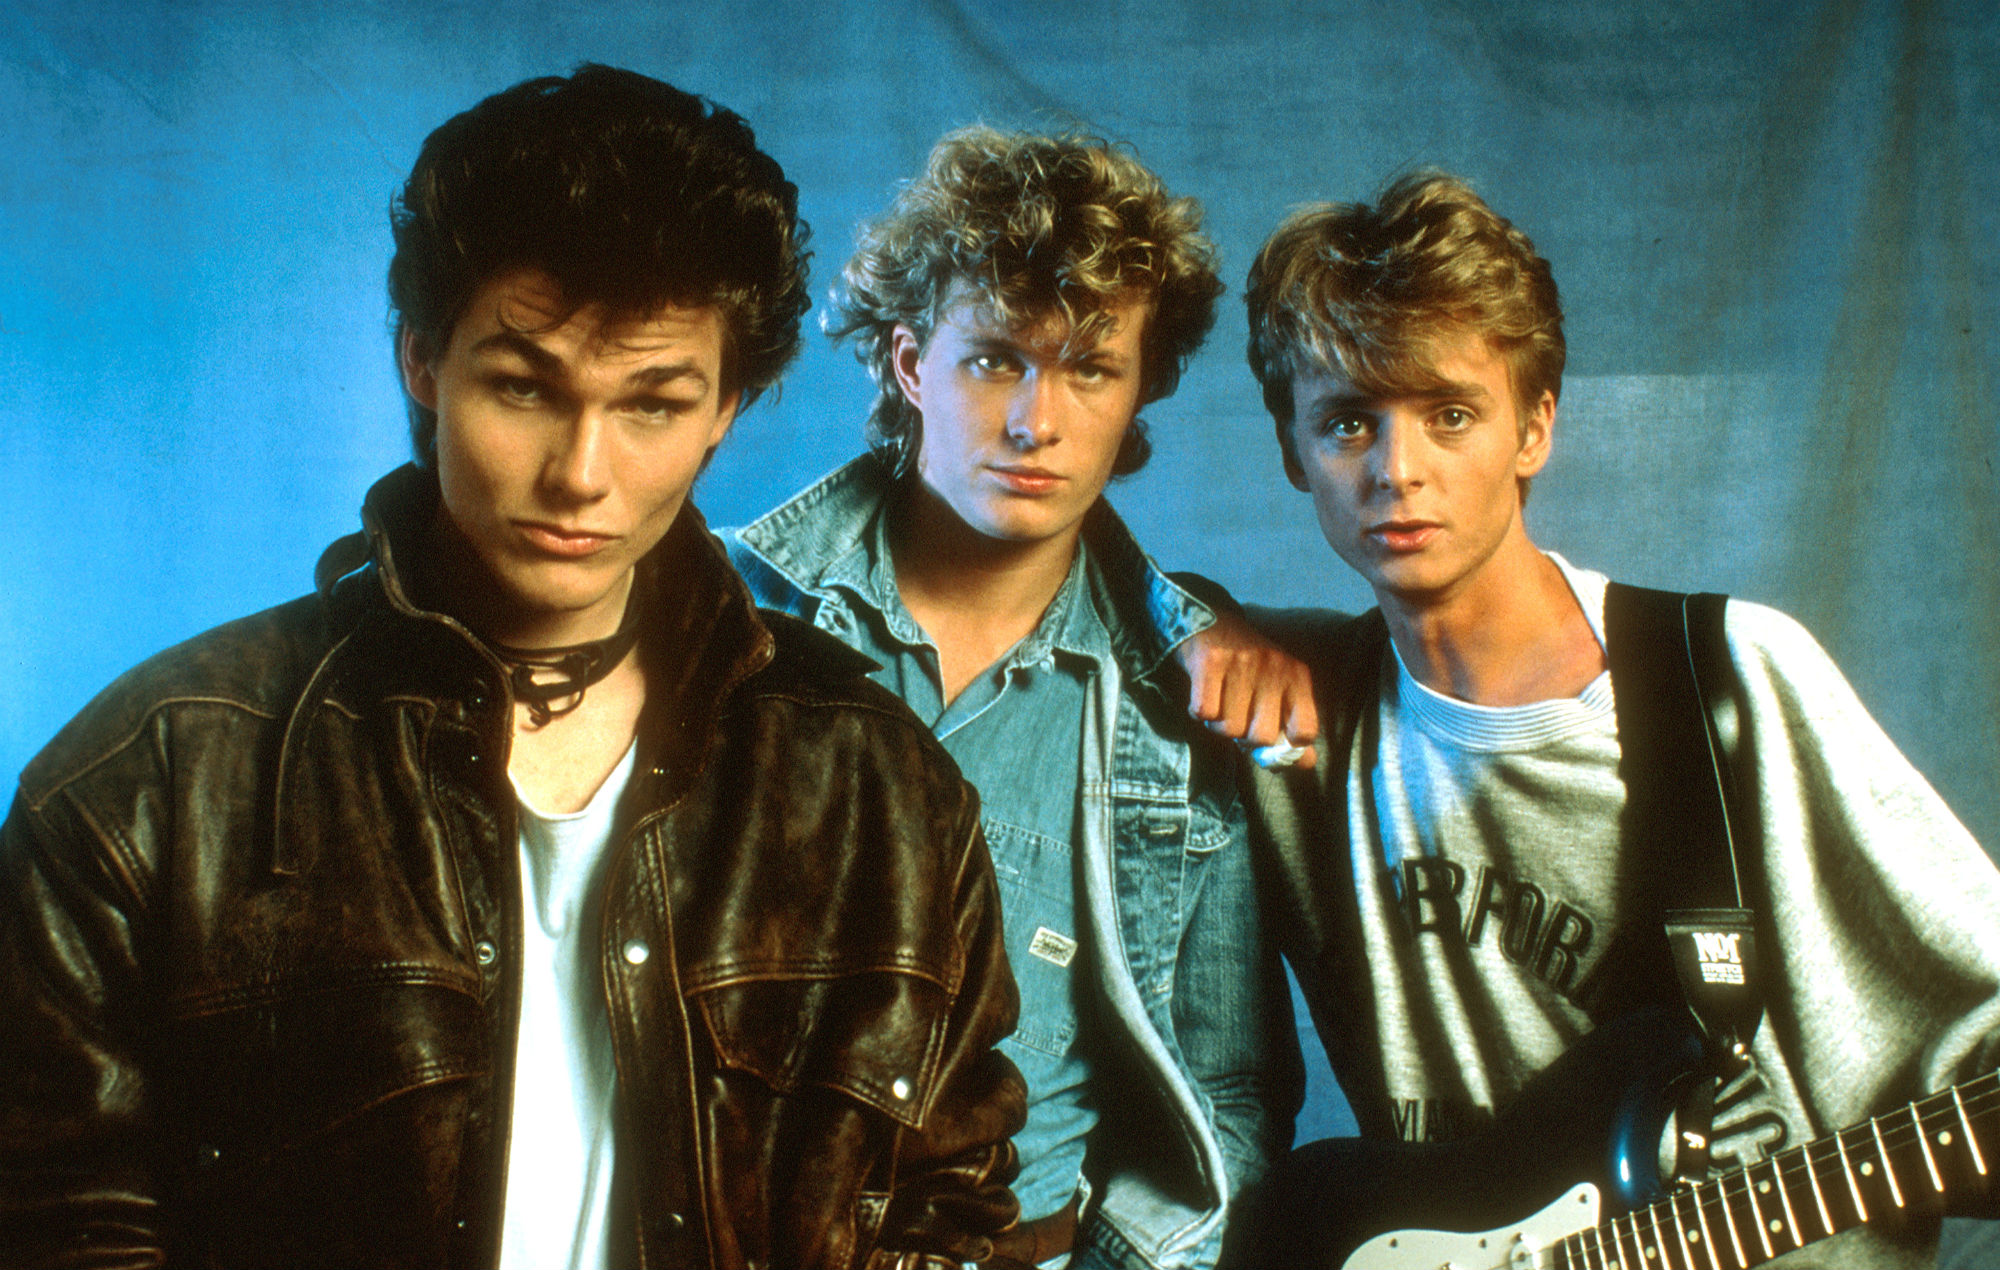 The documentary “a-ha The Movie” was shown in UK cinemas in May